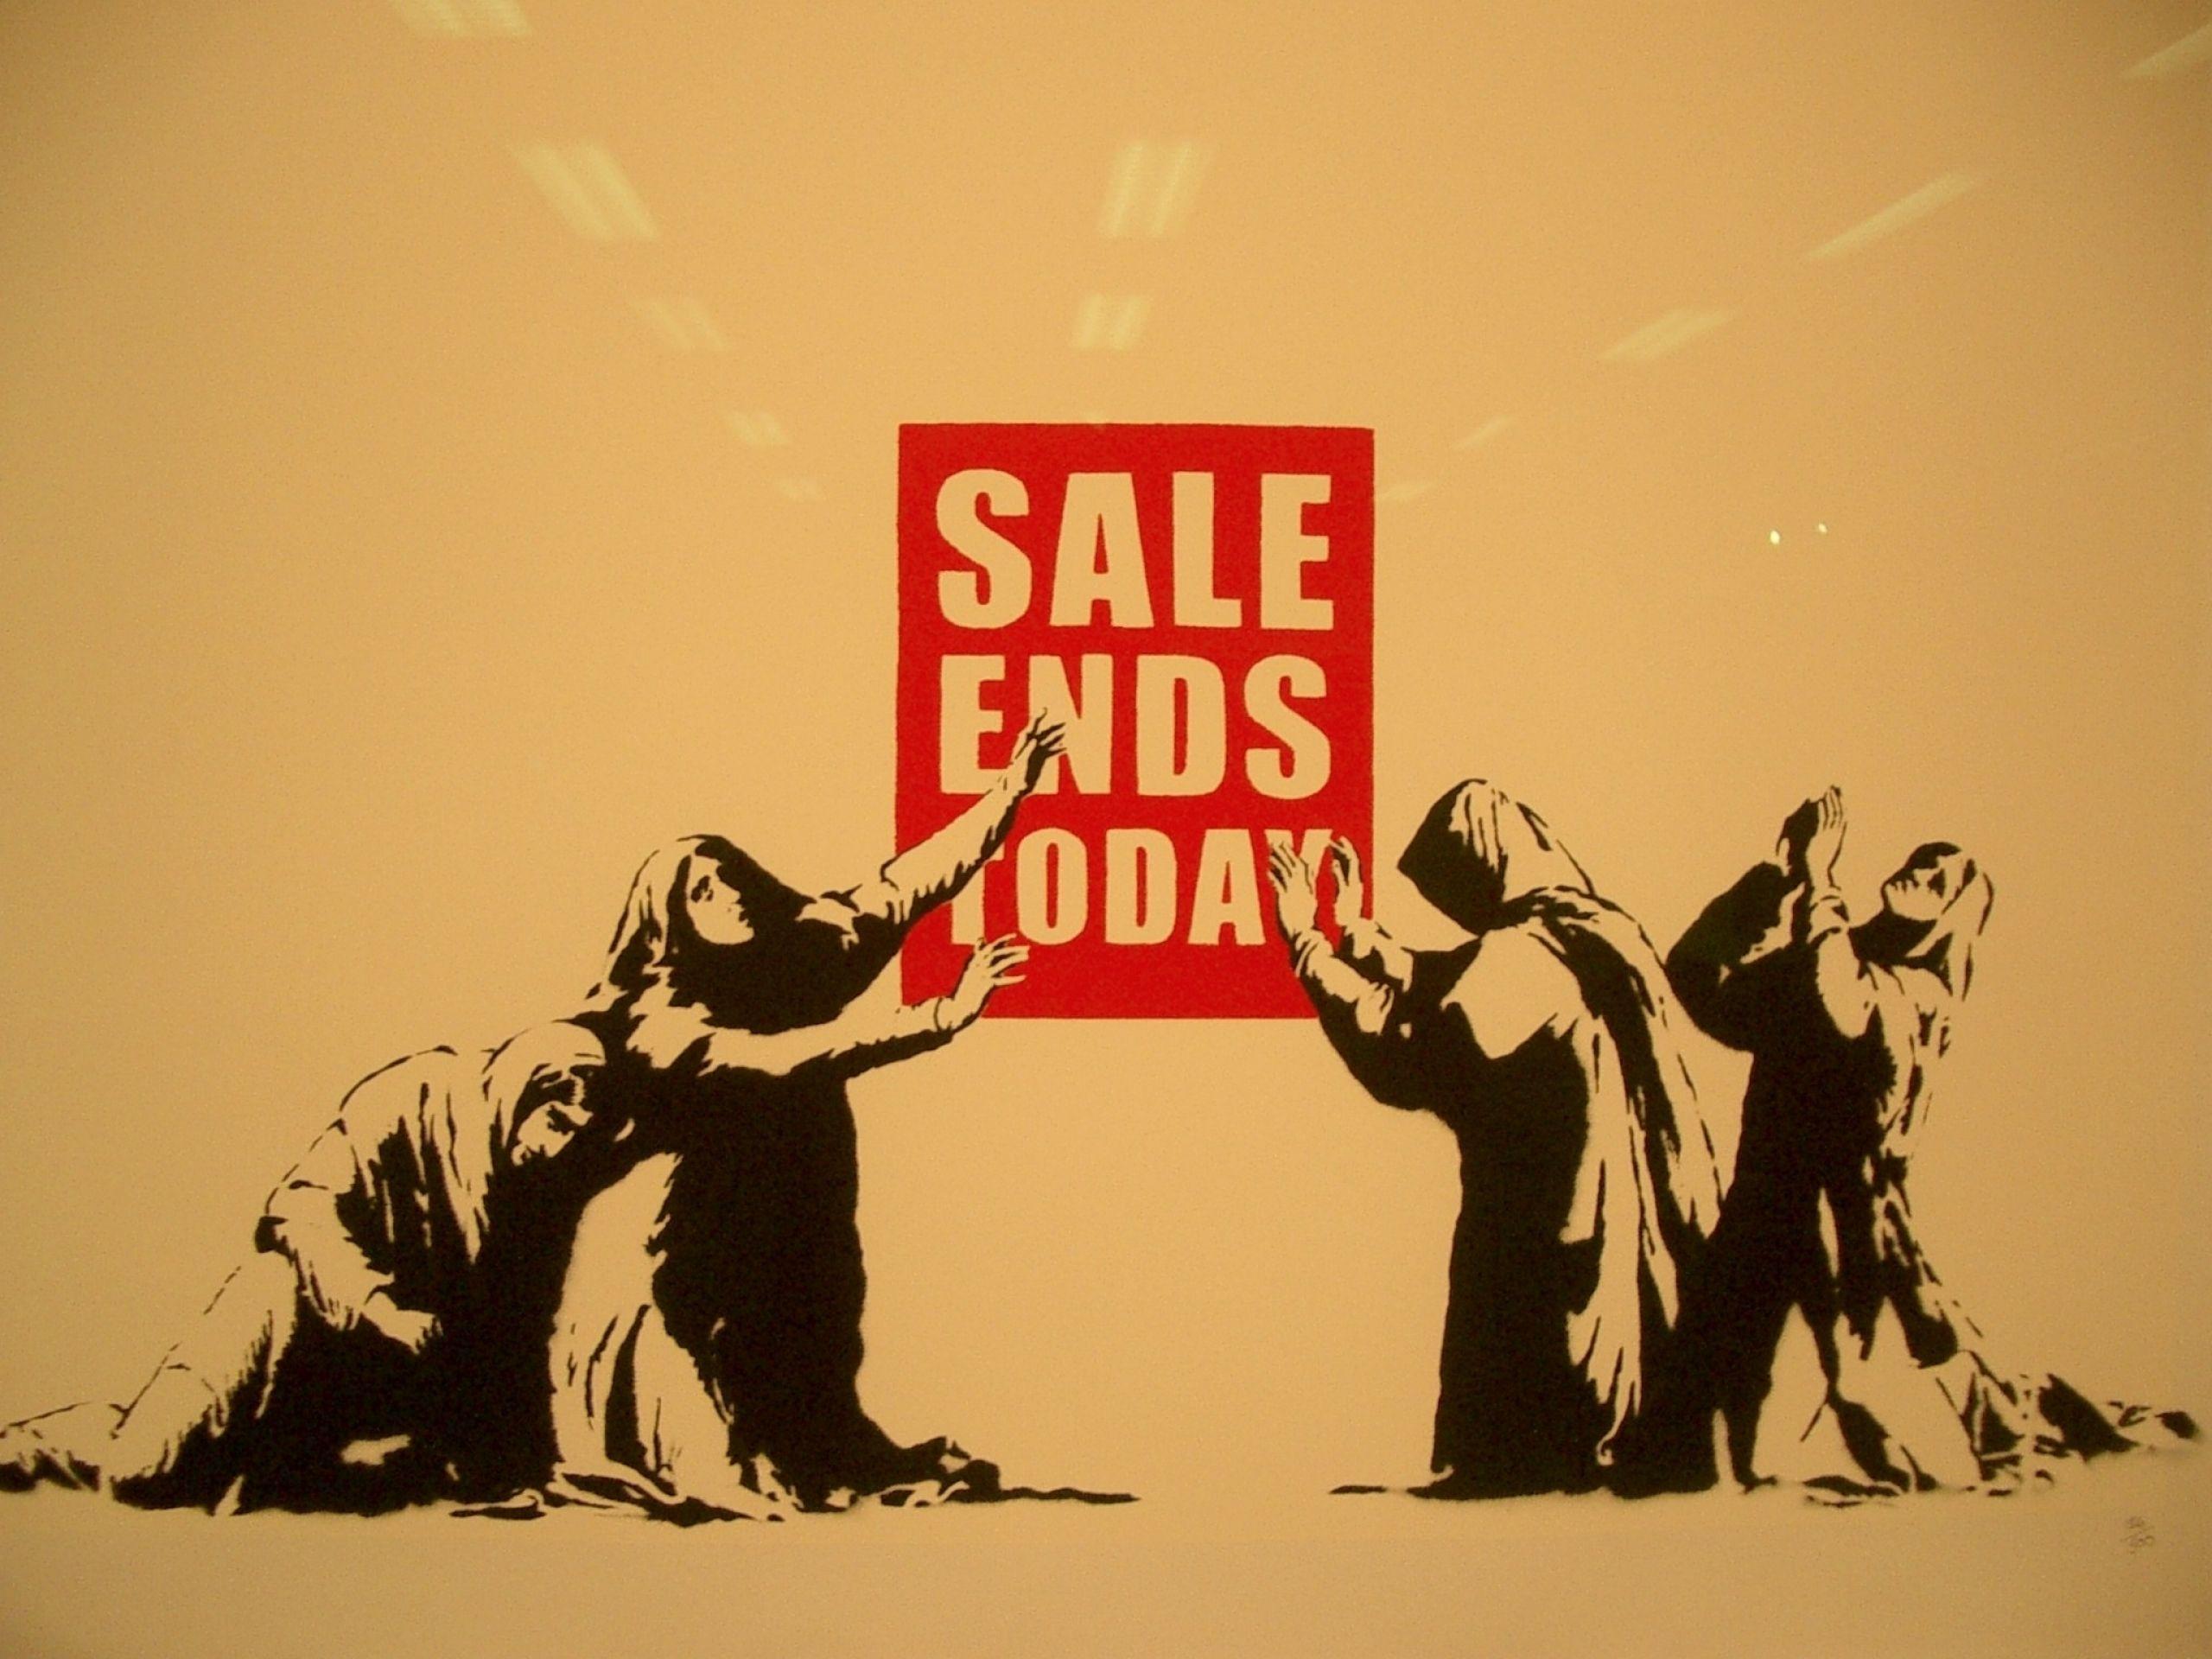 Graffiti, sale ends today, Banksy wallpaper and image